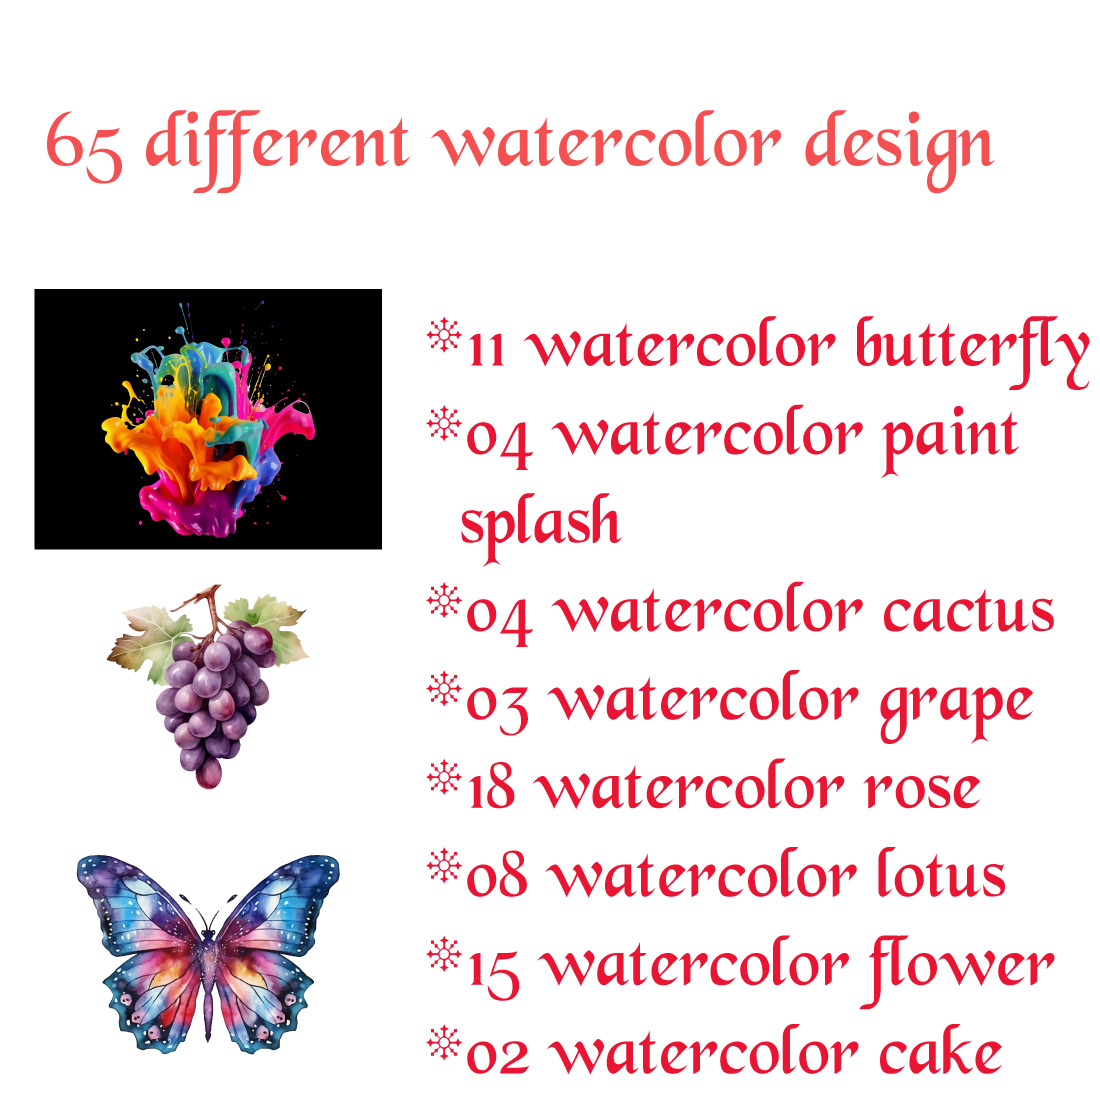 65 Different Watercolor Designs cover image.